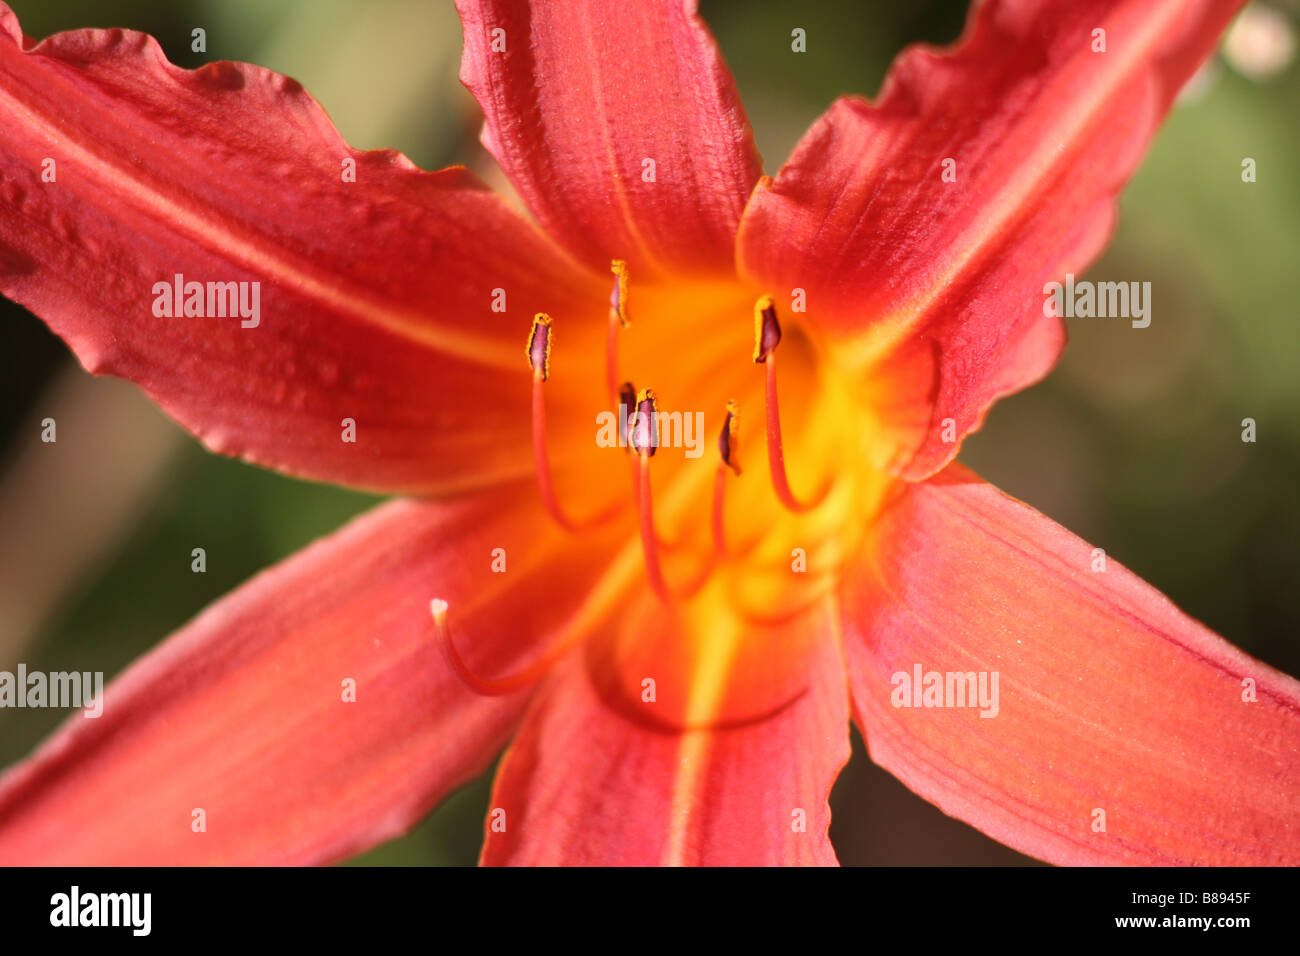 Sun shown red lily.  Yellow center with purple stamens. Stock Photo